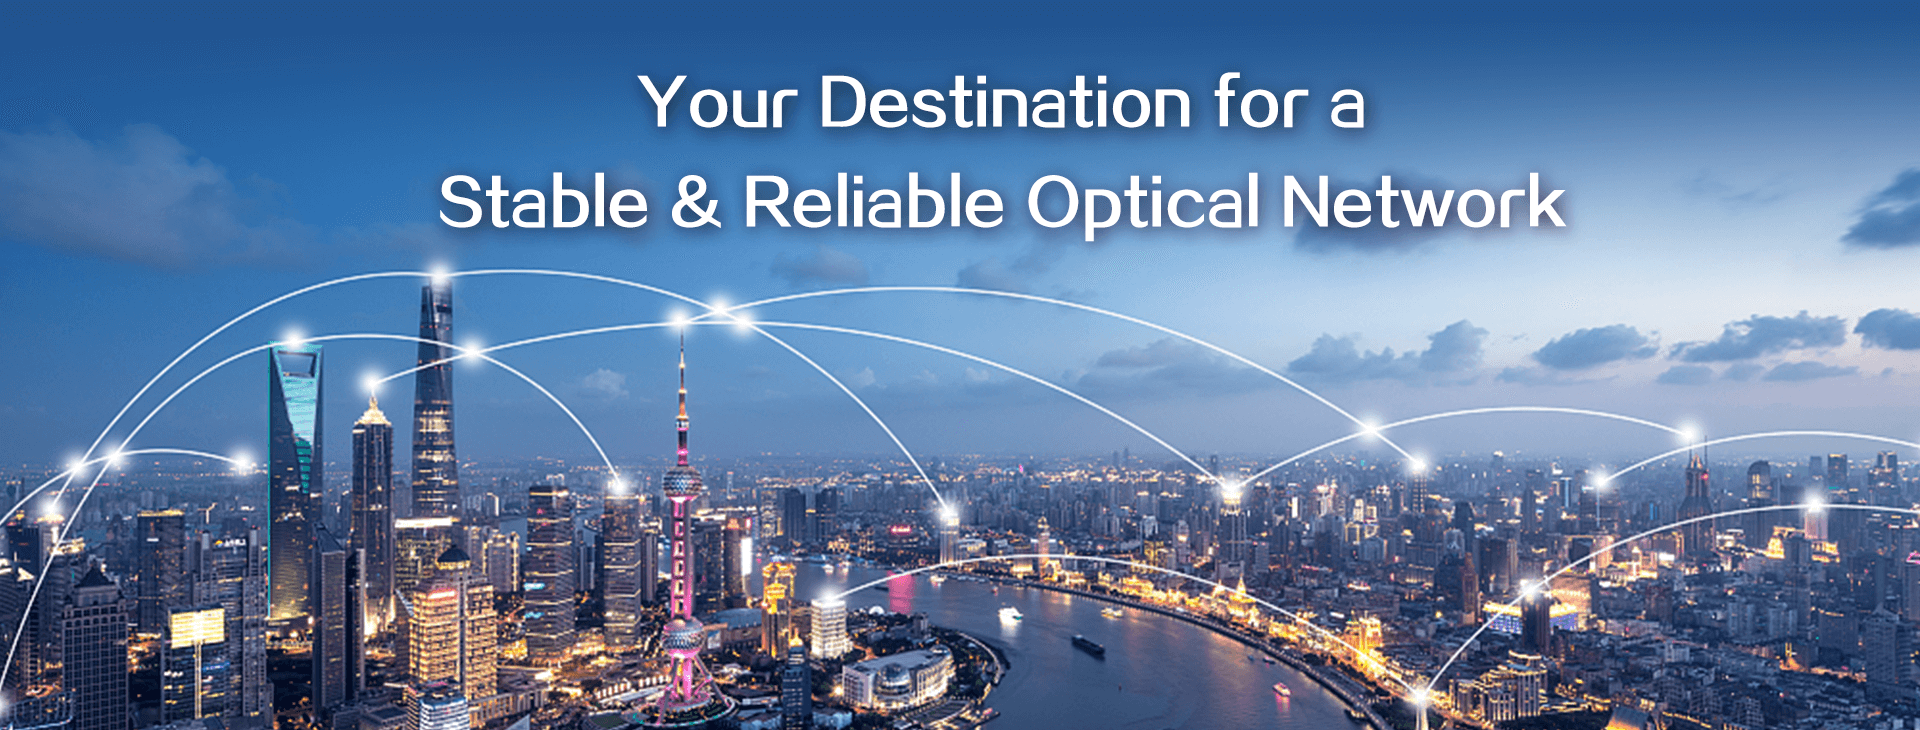 Your Destination for a Stable & Reliable Optical Network